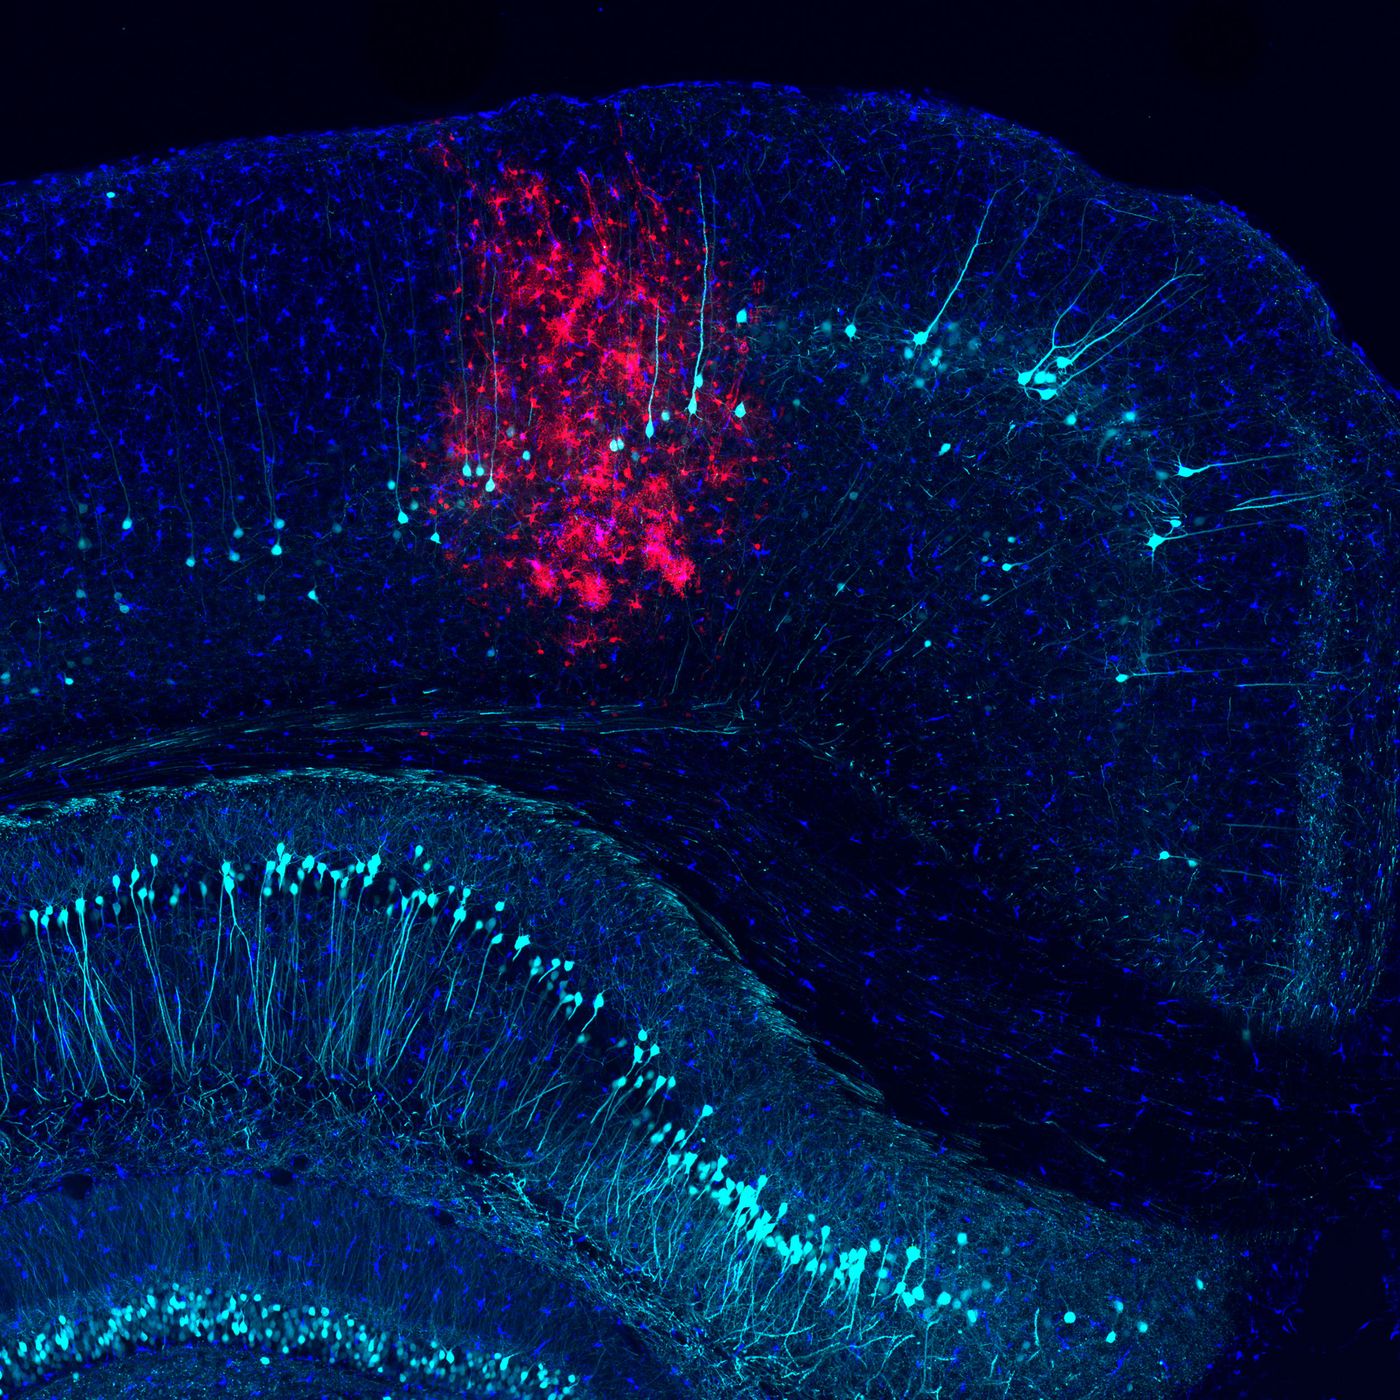 In the cortex of a mouse, adenovirus-transduced cells (red) appear among labeled microglia (dark blue) and subsets of neurons (light blue) / Credit: Salk Institute